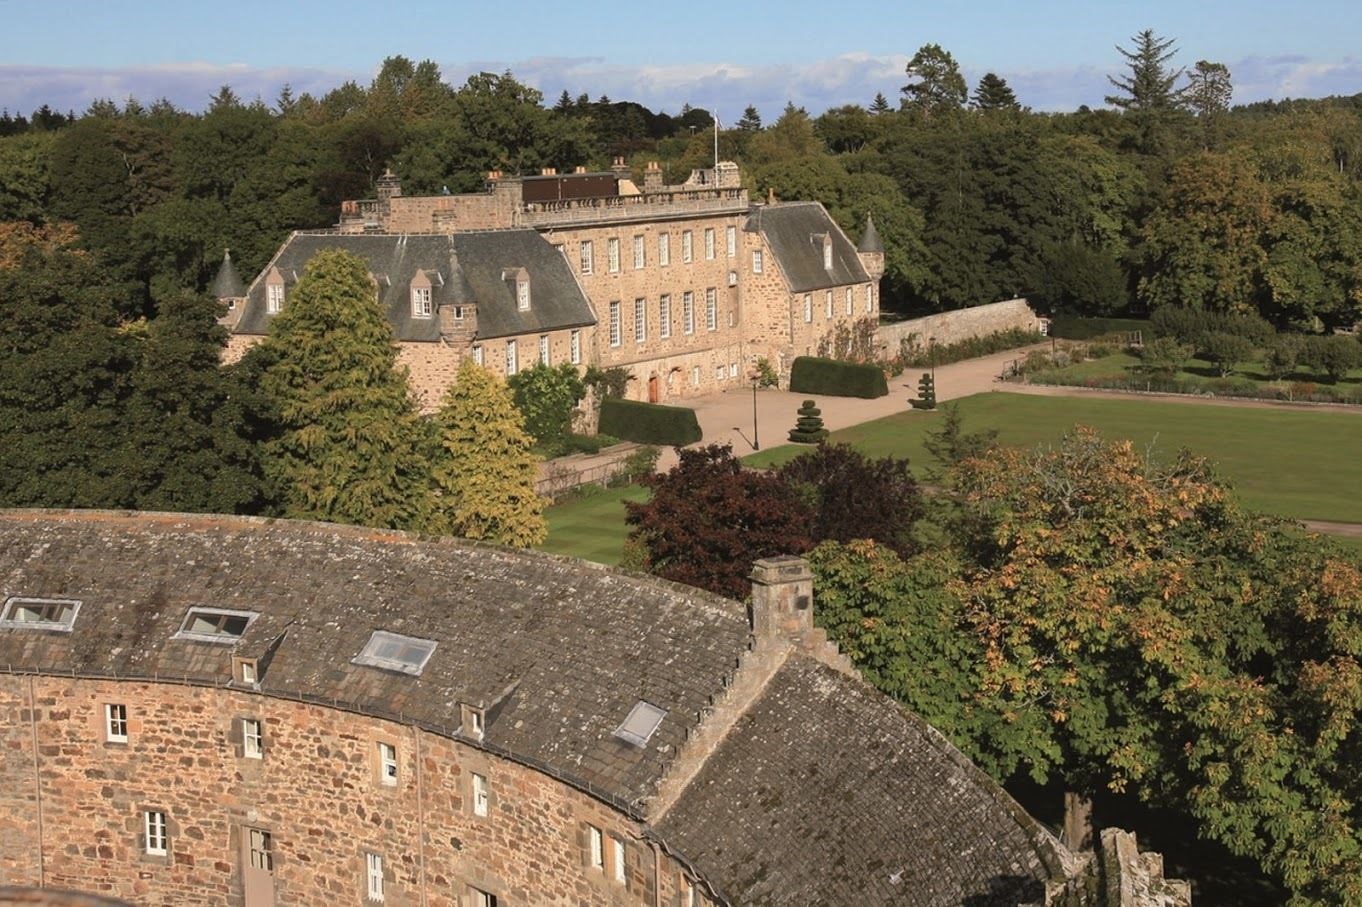 Gordonstoun School, among other Scottish boarding schools, has seen a rise in the number of admissions inquiries over the past year.